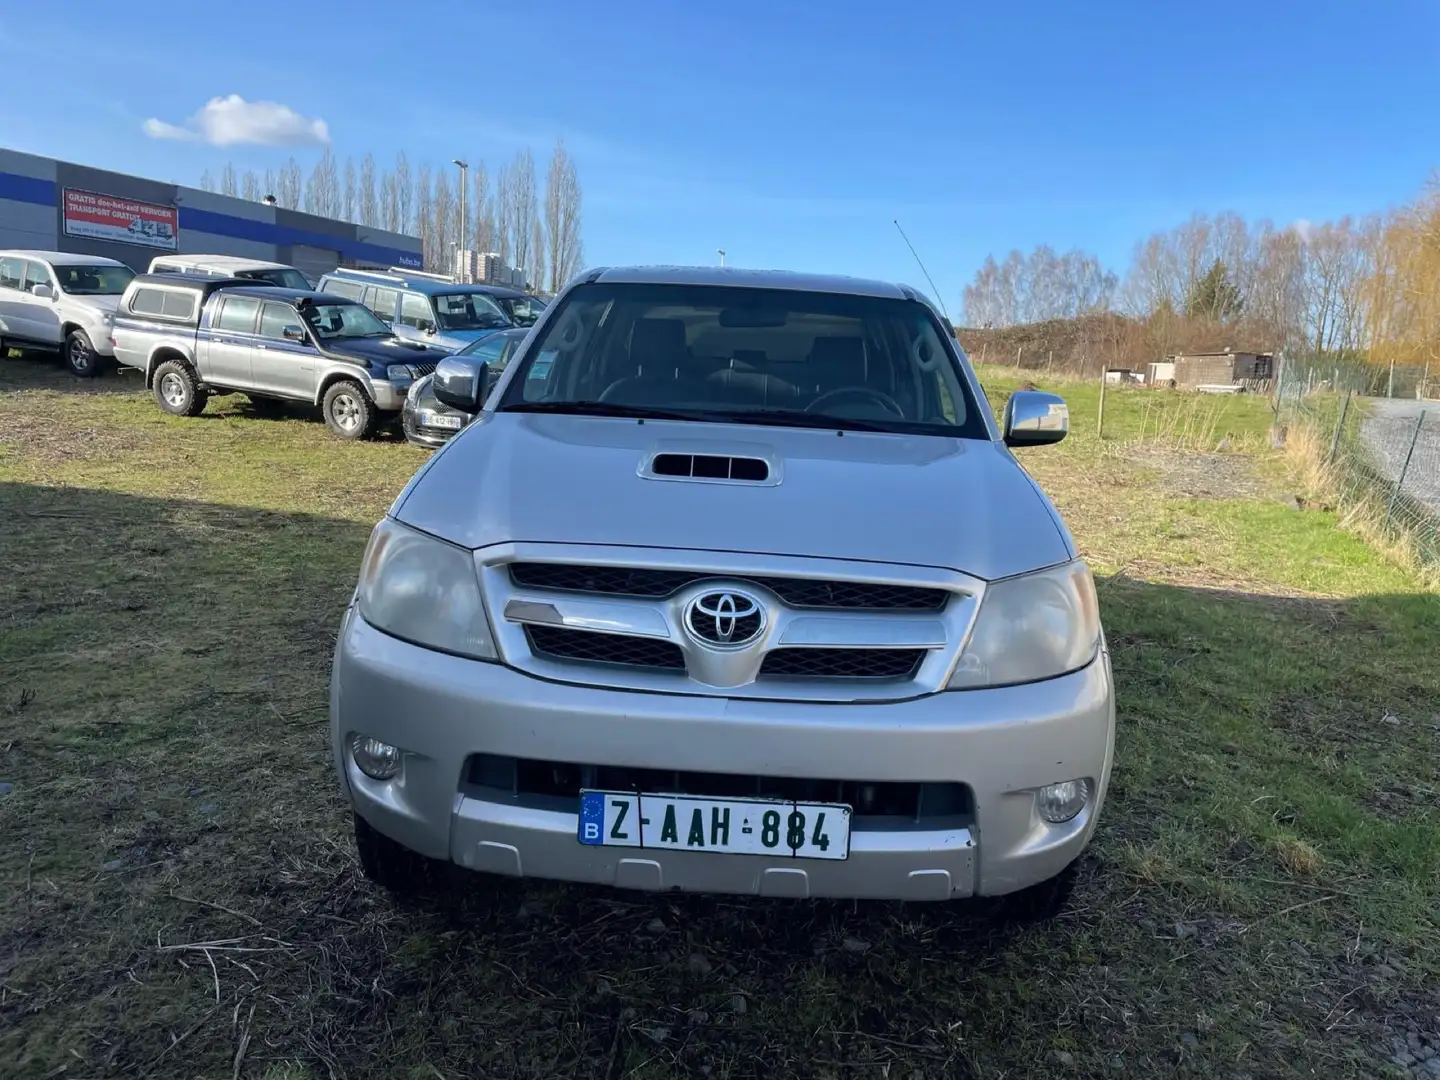 Toyota Hilux diesel boite automatic 3 litres climatise srebrna - 1